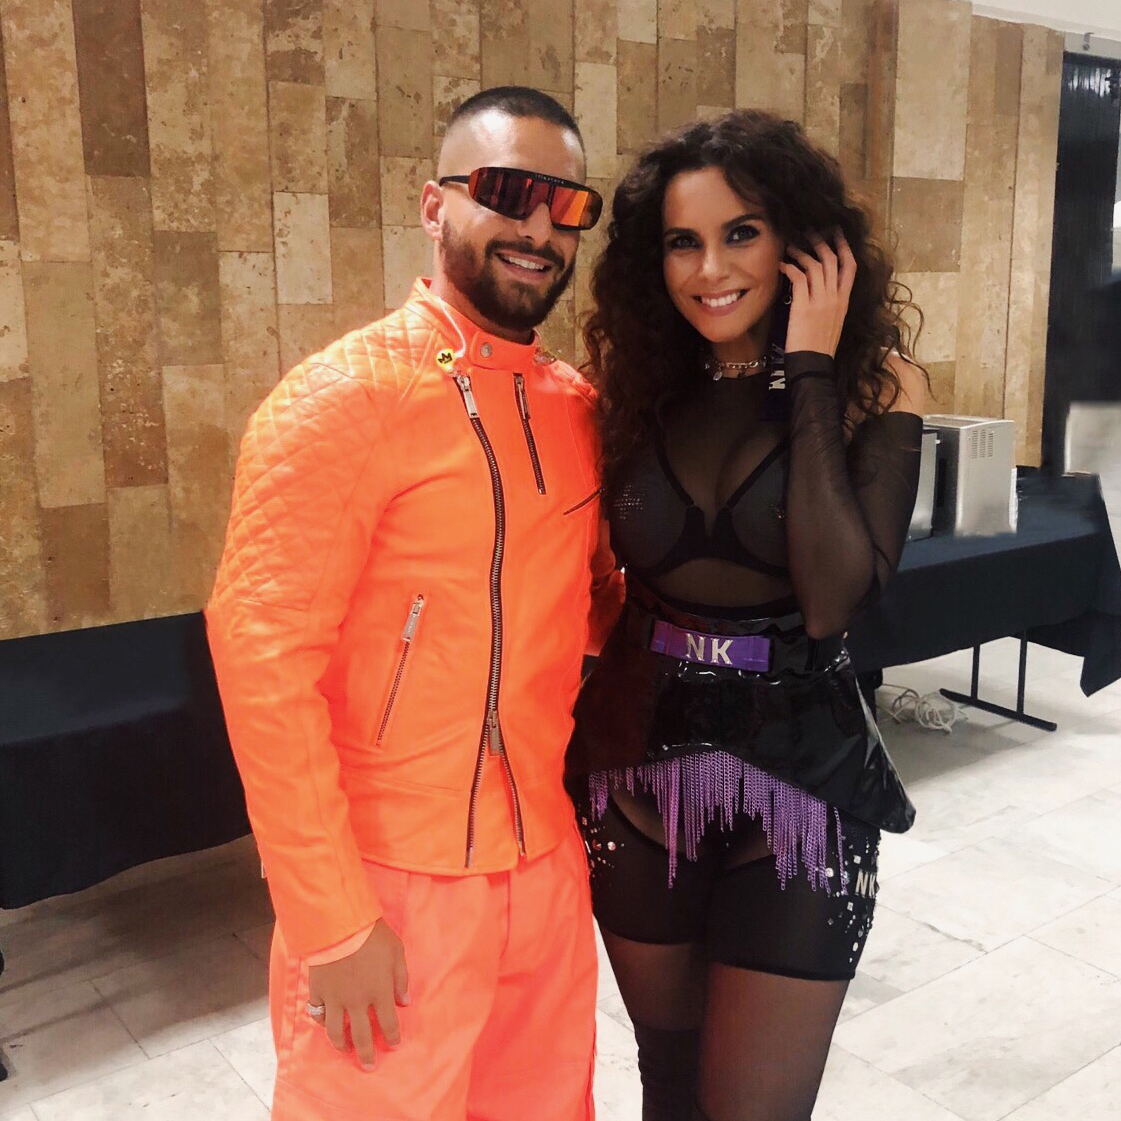 NK set the evening on fire performing on one stage with world famous Latin singer MALUMA